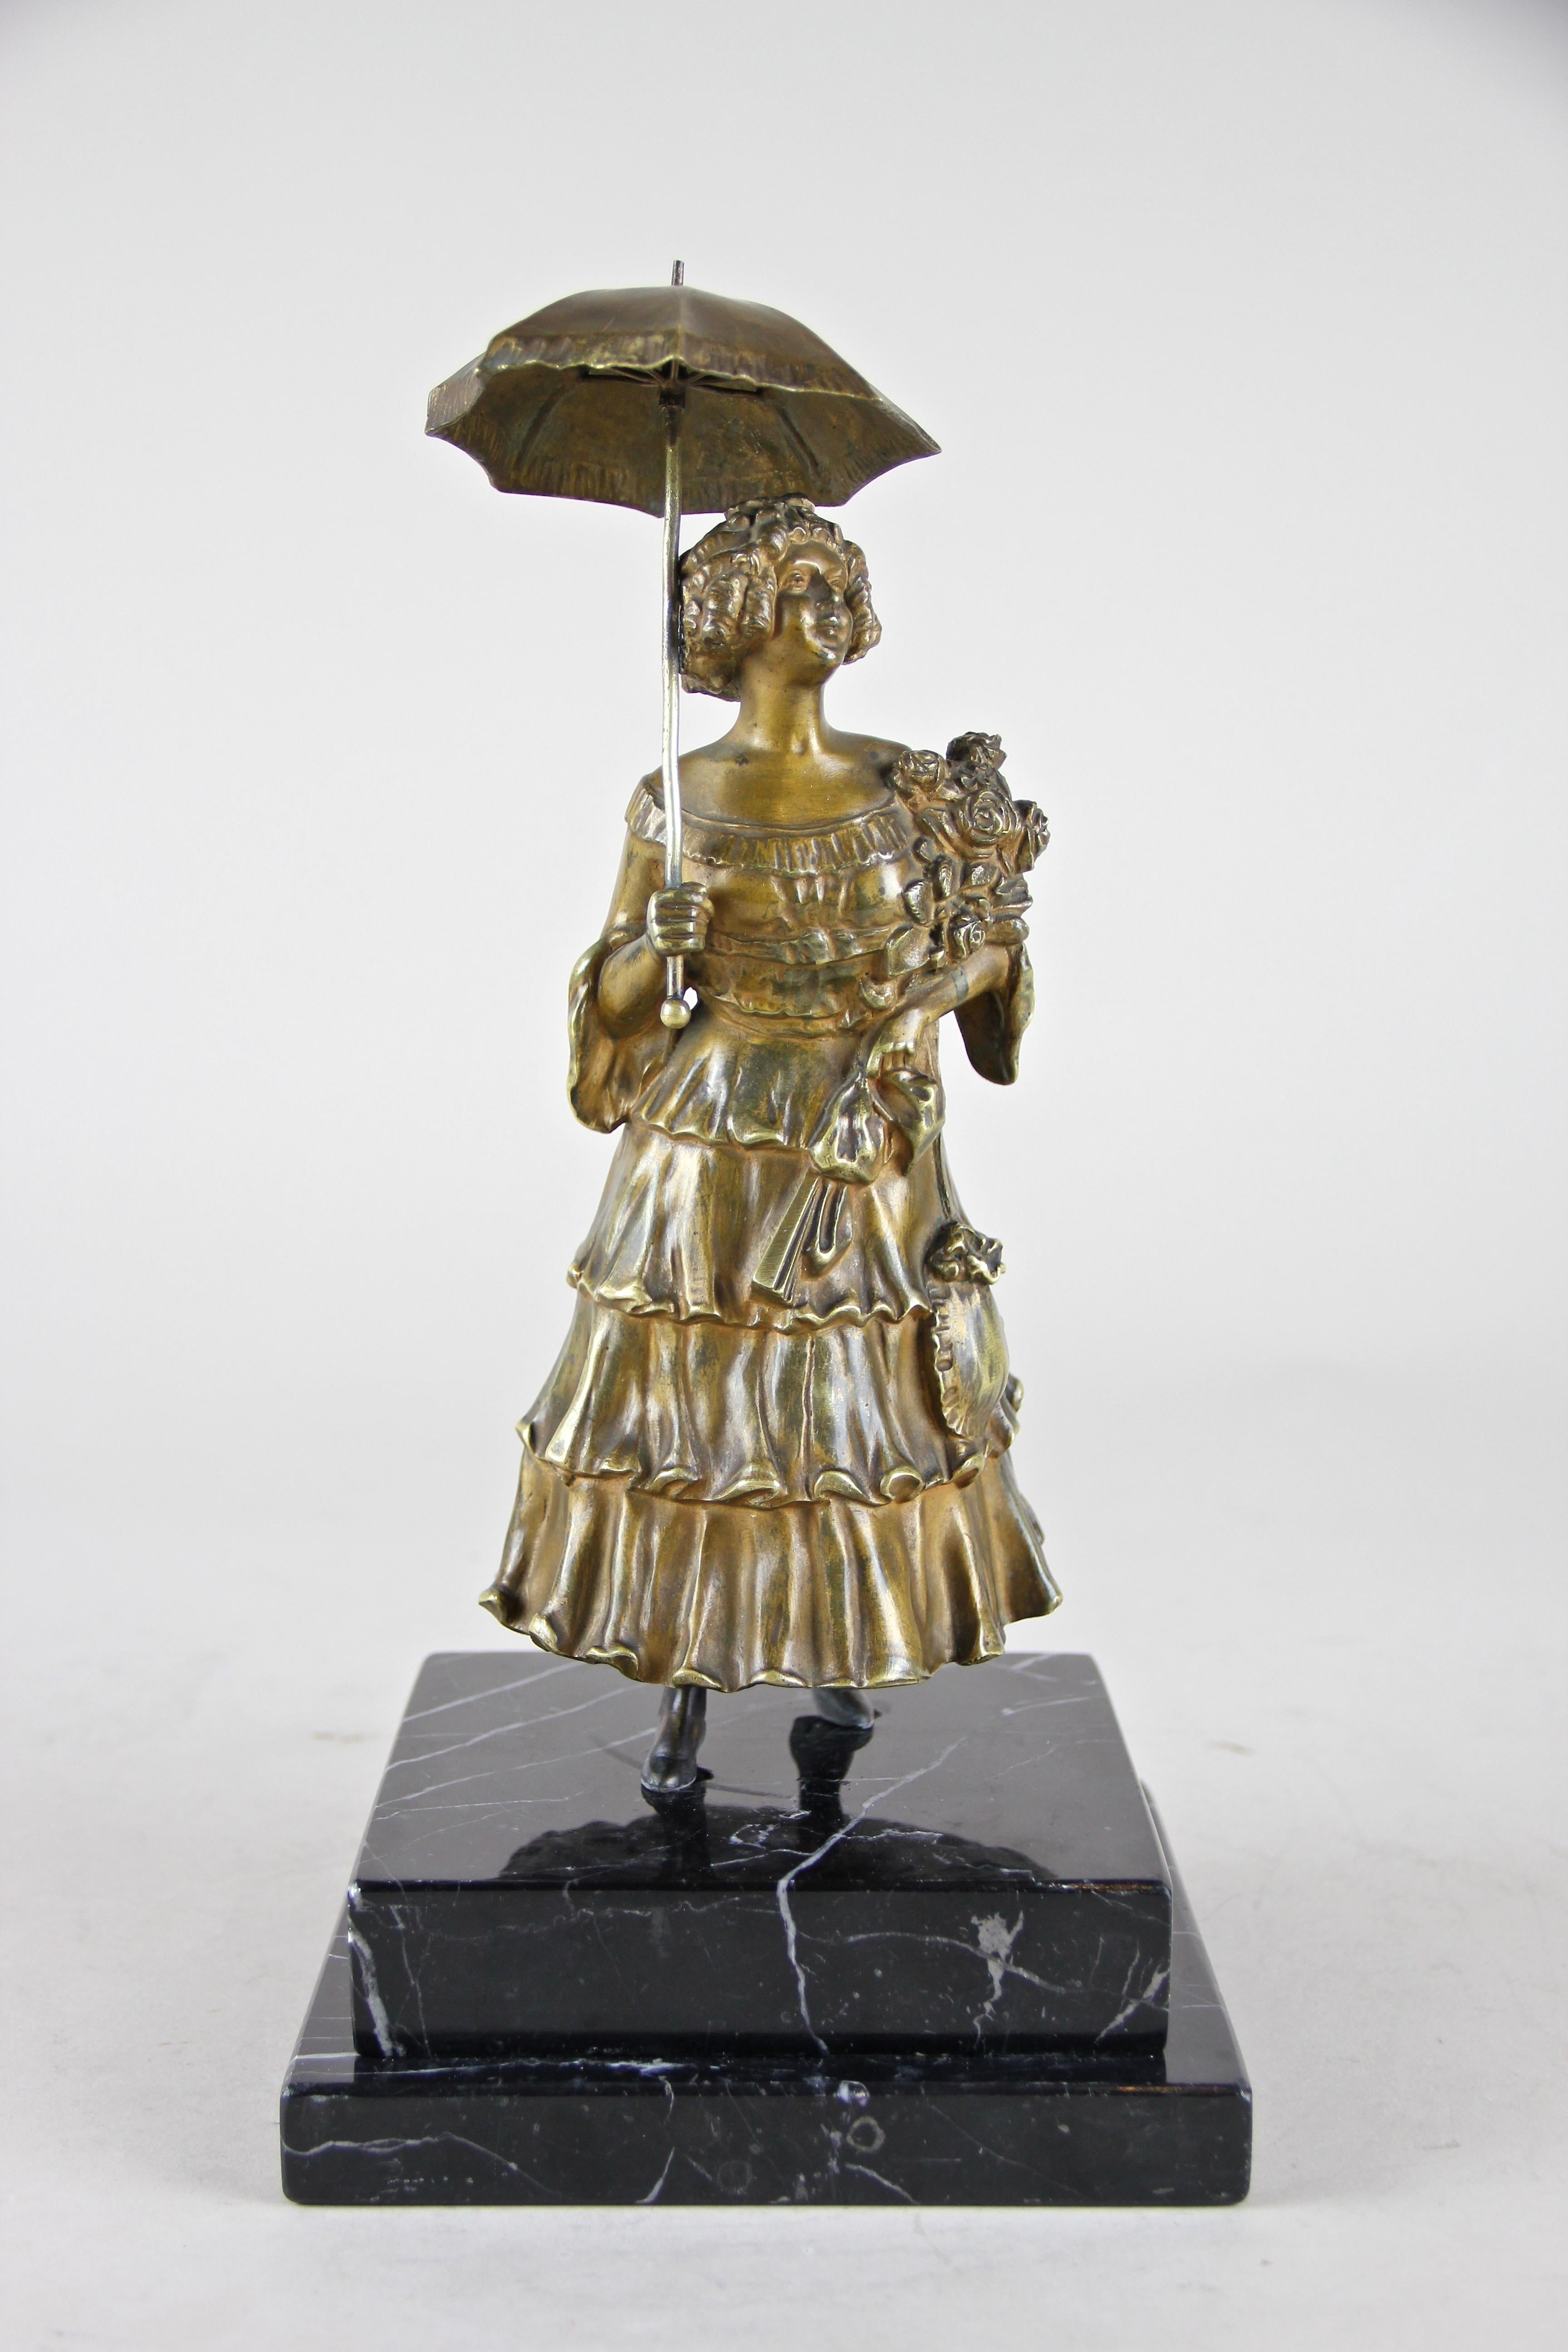 Lovely bronze figurine attributed to Carl Kauba (1865 - 1922) from the early Art Nouveau period in Austria, circa 1900. The small but heavy solid bronze sculpture stands on a base of black marble depicting a beautiful young lady in a traditional